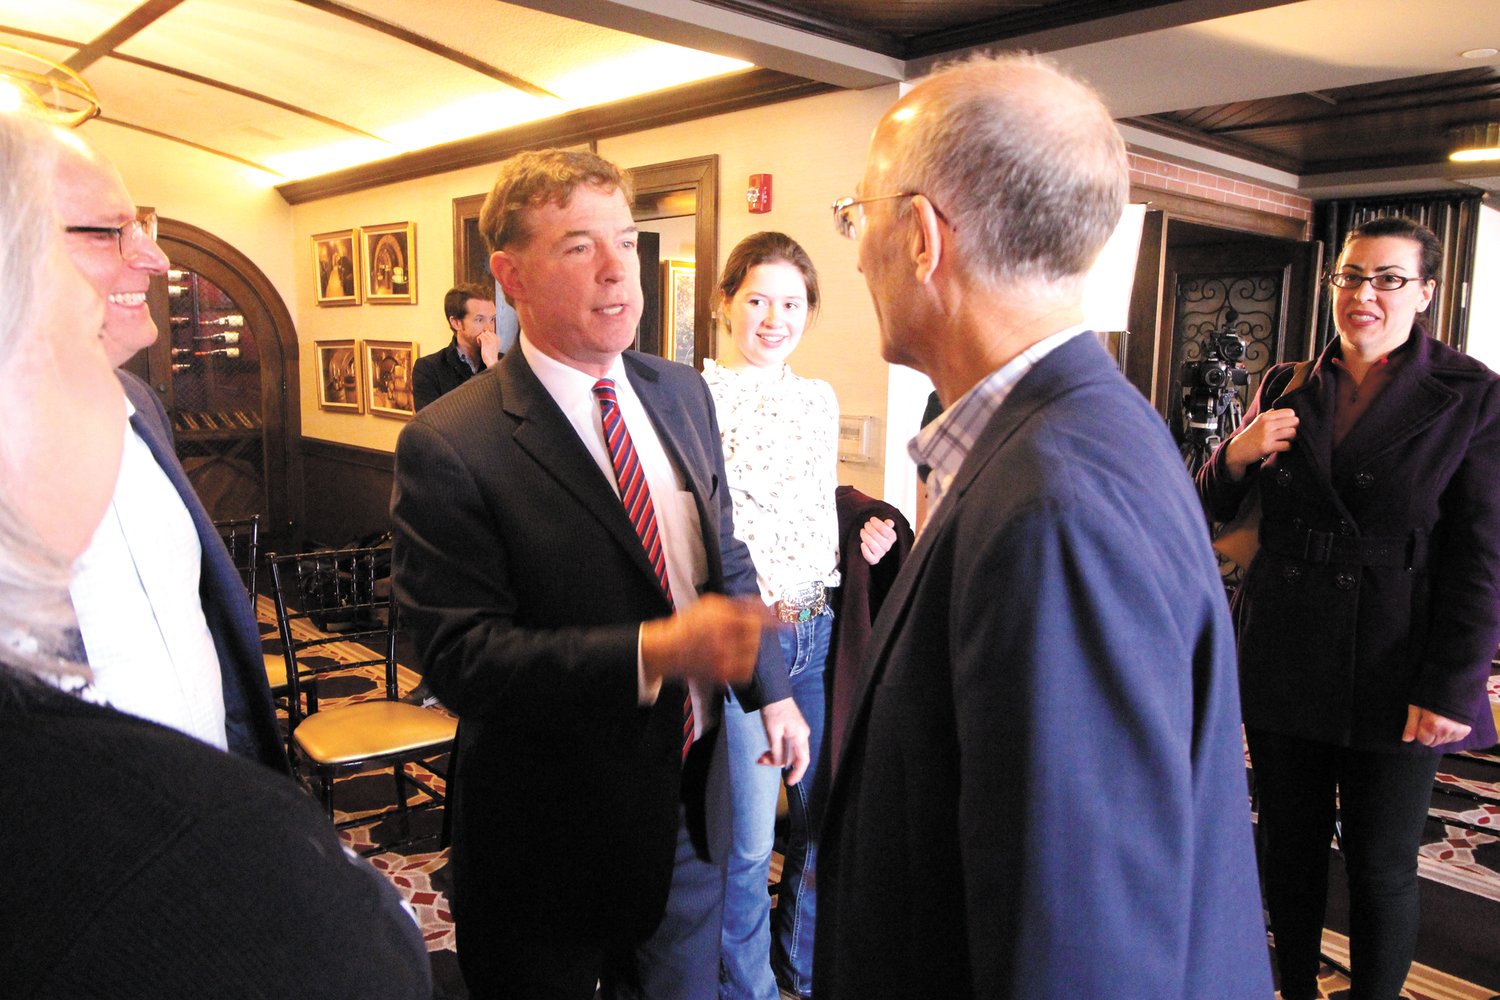 MINGLING: Following his comments at the Chapel View Grille, Steve Laffey lingered to renew acquaintances from the days he ran and served as mayor of Cranston. (Cranston  Herald photo)